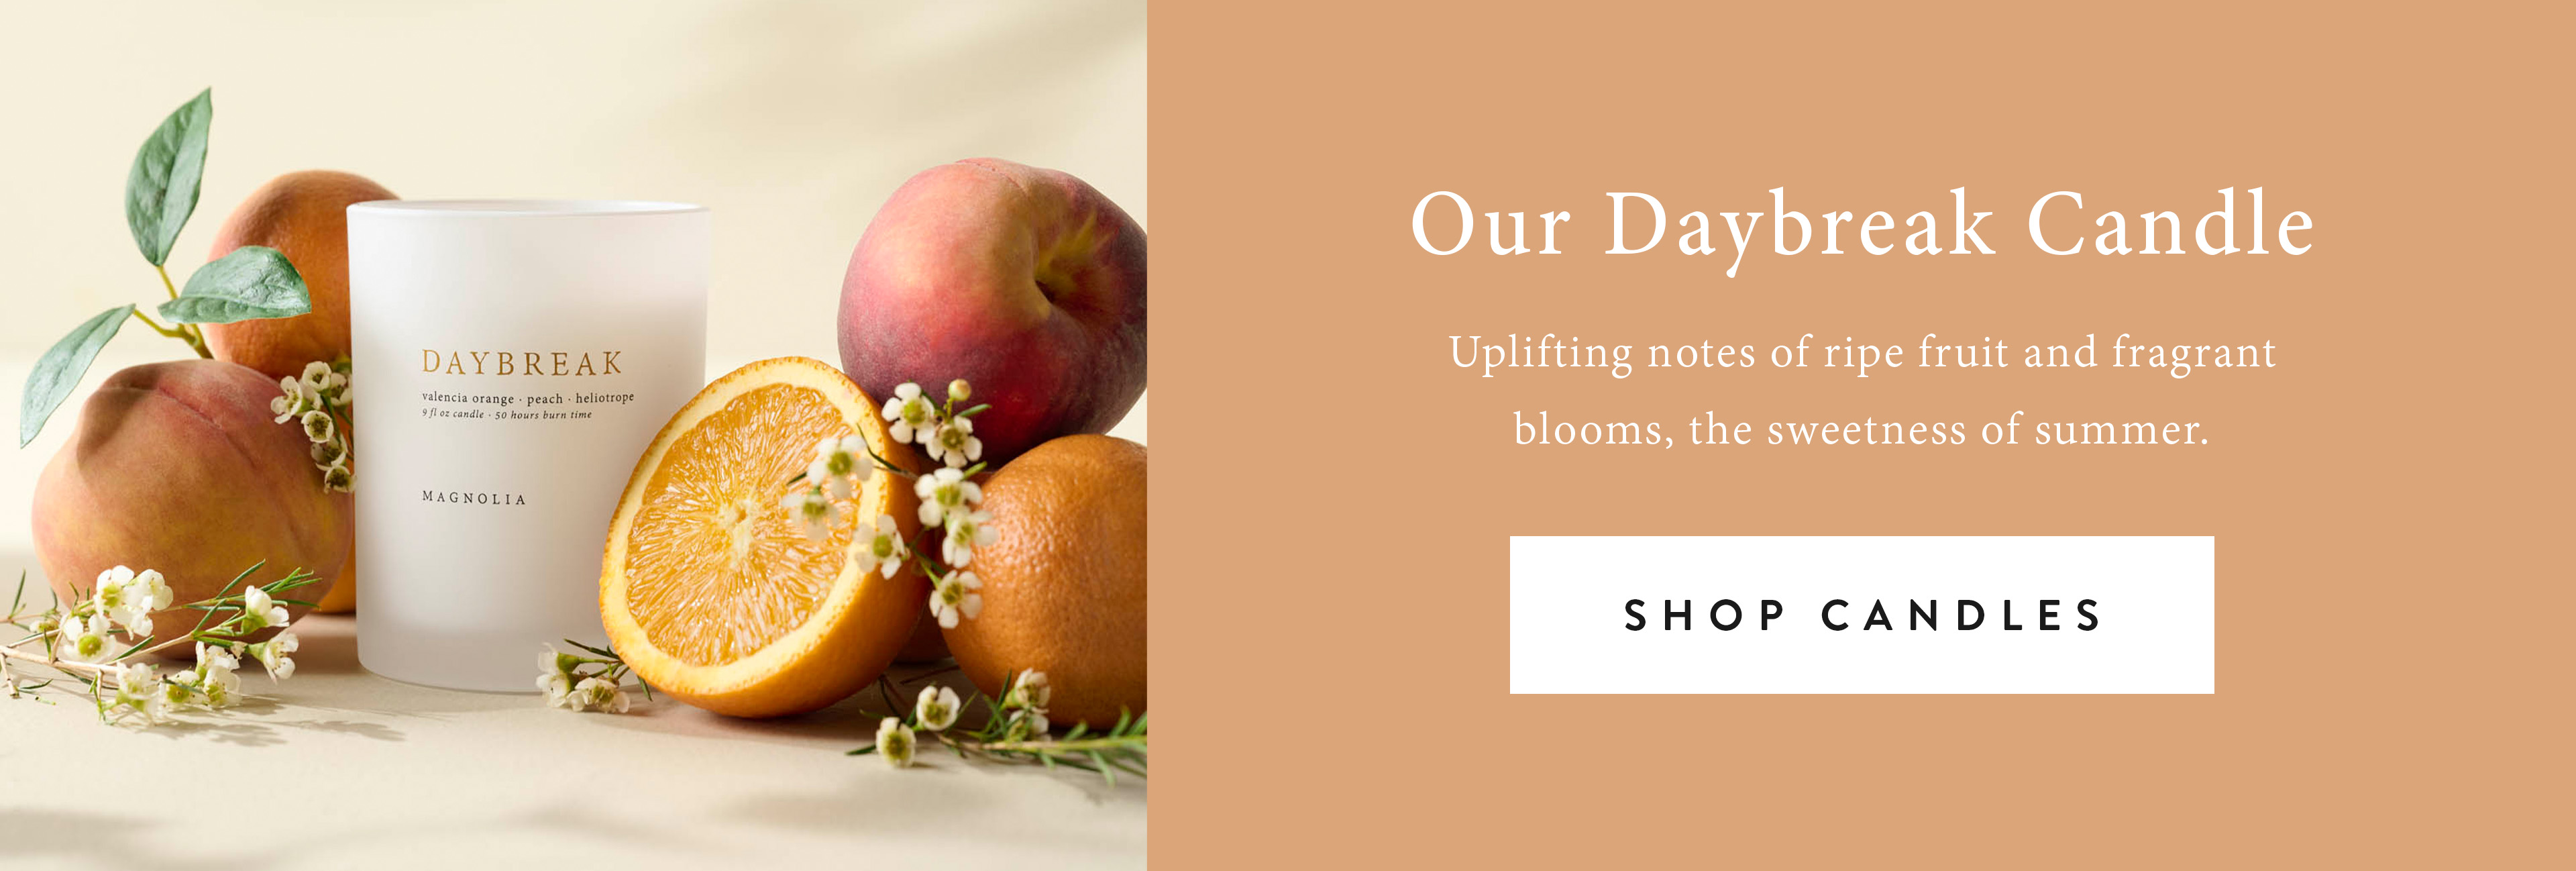 Our Daybreak Candle.  Uplifting Notes of ripe fruit and fragrant blooms, the sweetness of summer.  shop candles here.